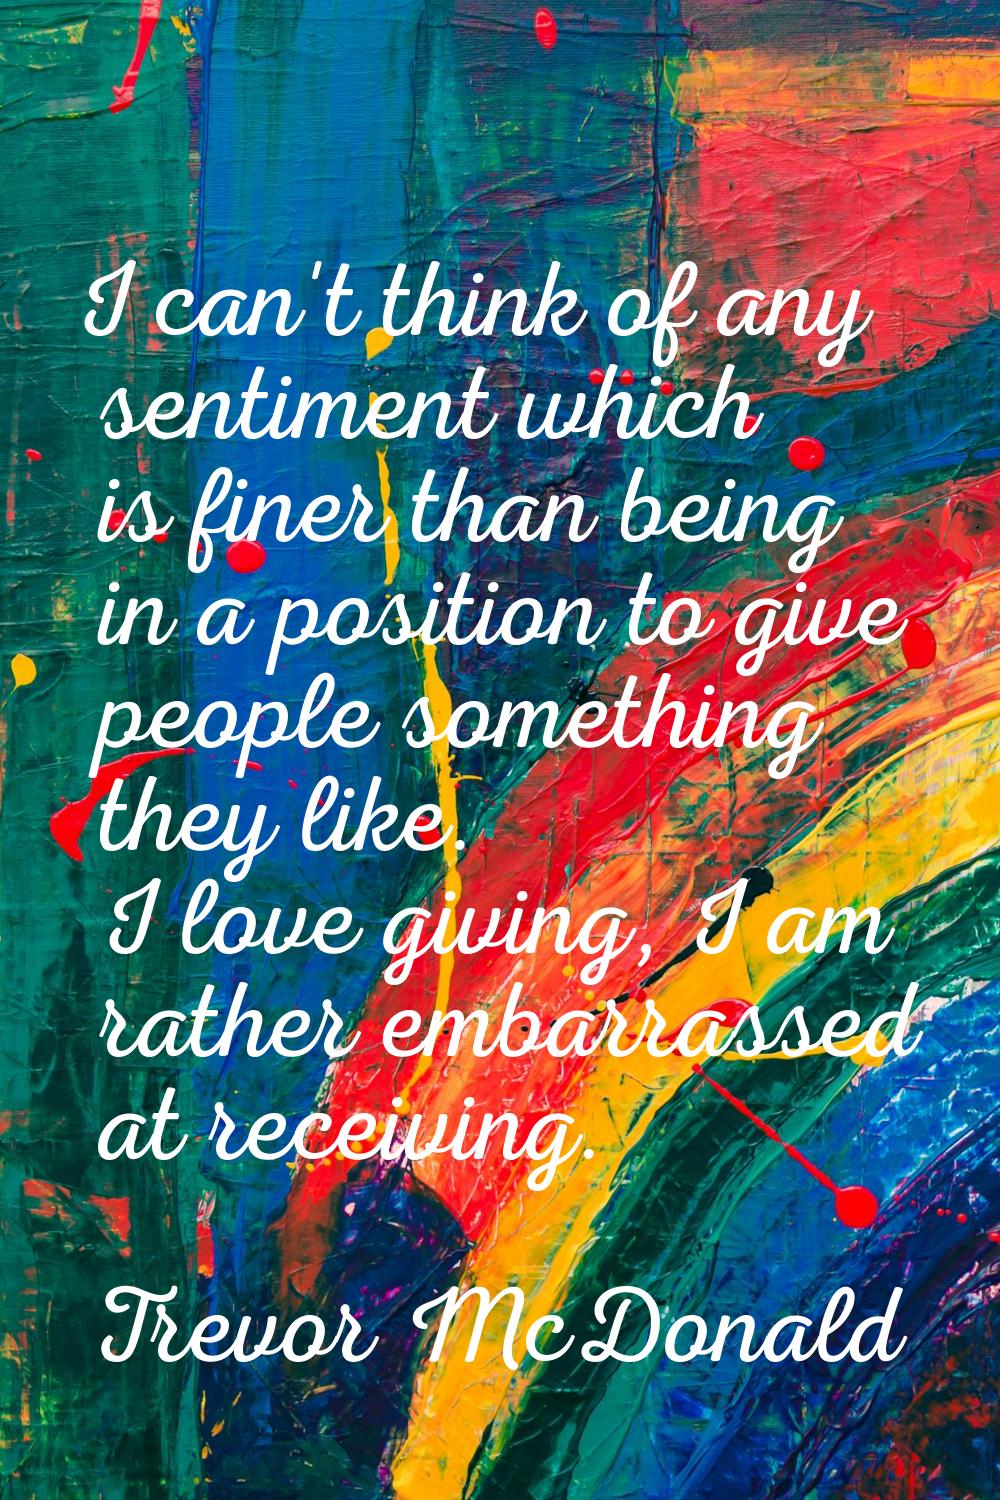 I can't think of any sentiment which is finer than being in a position to give people something the